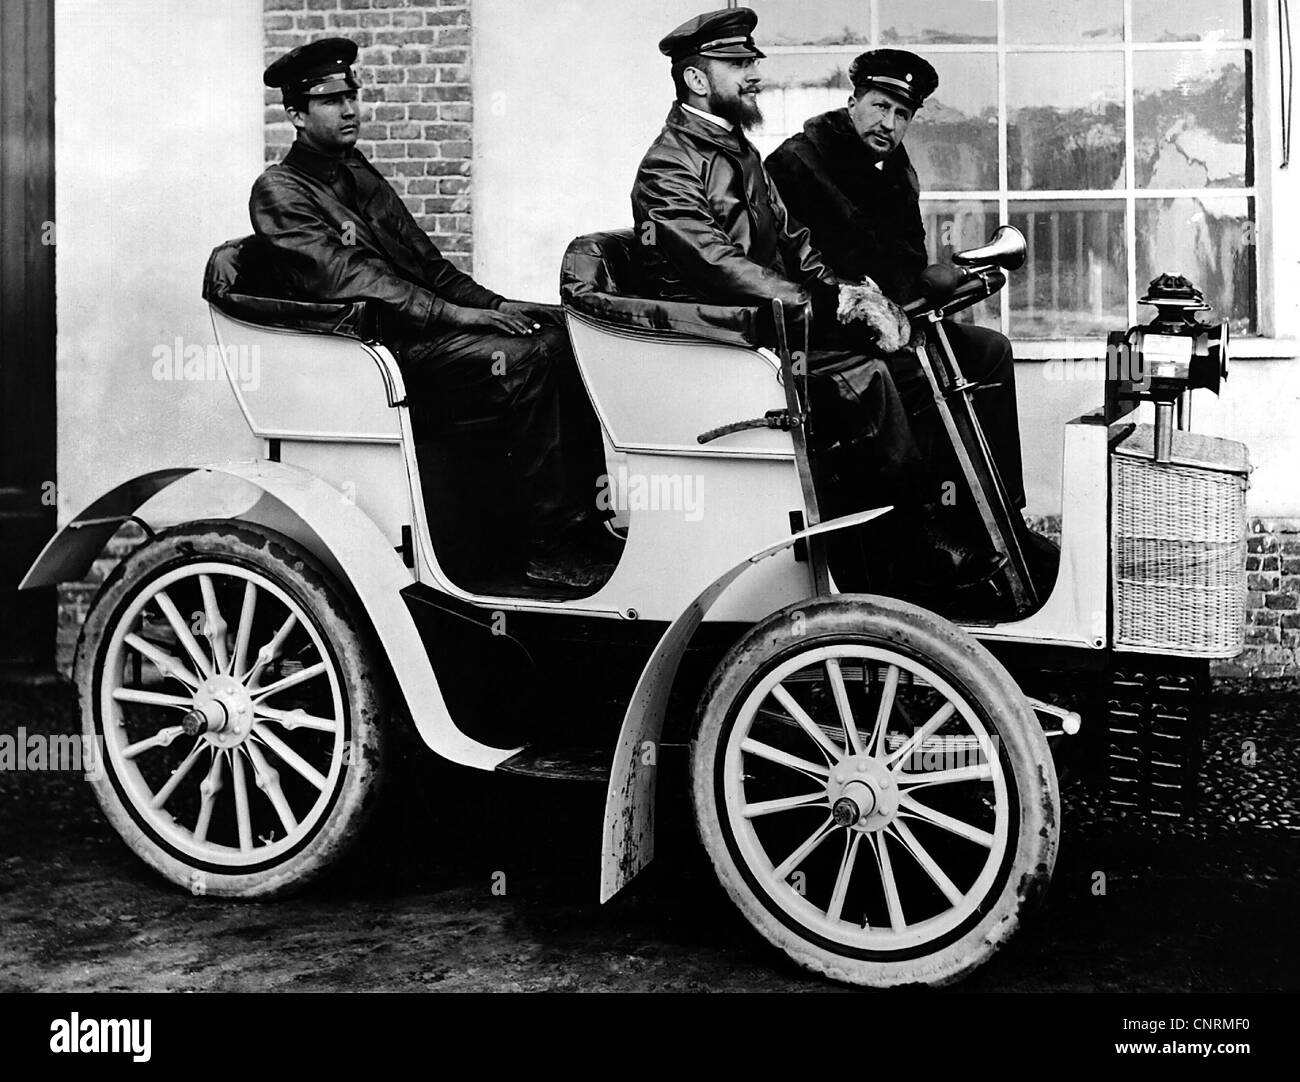 transport / transportation, cars, veteran car, circa 1900, Additional-Rights-Clearences-Not Available Stock Photo